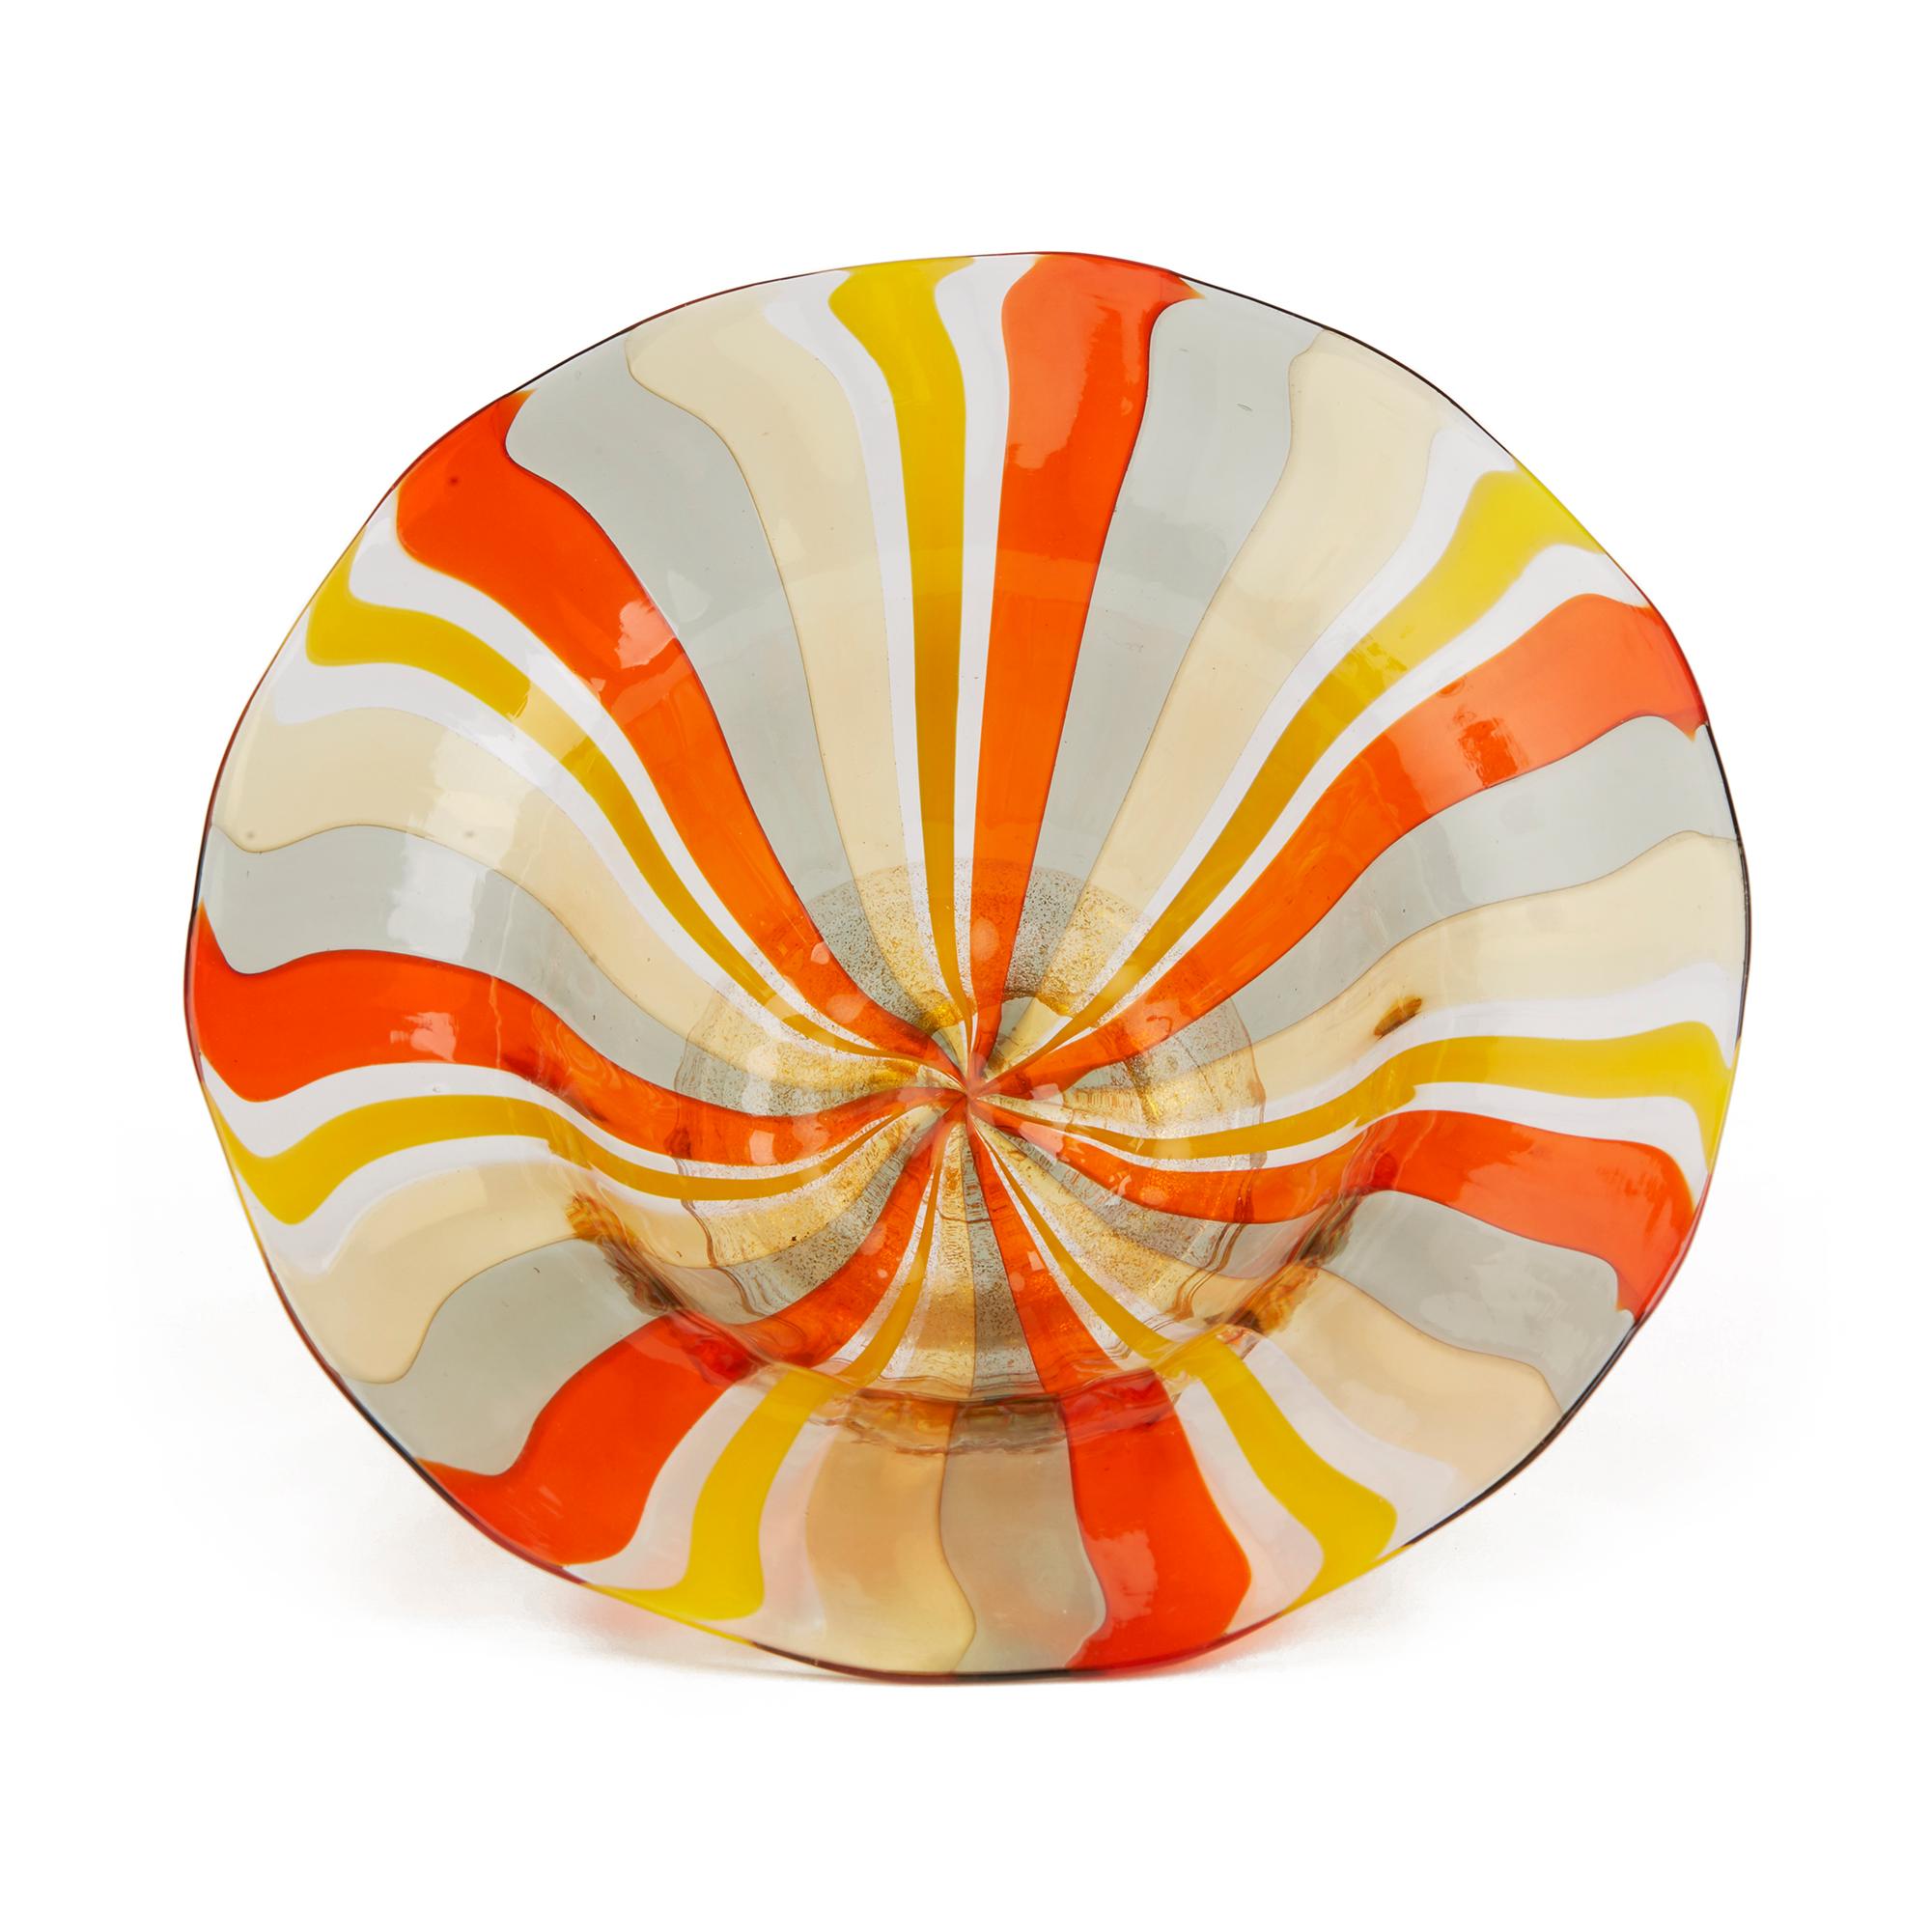 A stunning vintage Venetian Murano Harlequin art glass design bowl by acclaimed glass maker Antonio Salviati. The rounded bowl stands raised on a narrow rounded clear glass foot with gold aventrine inclusions. The slightly irregular shaped bowl